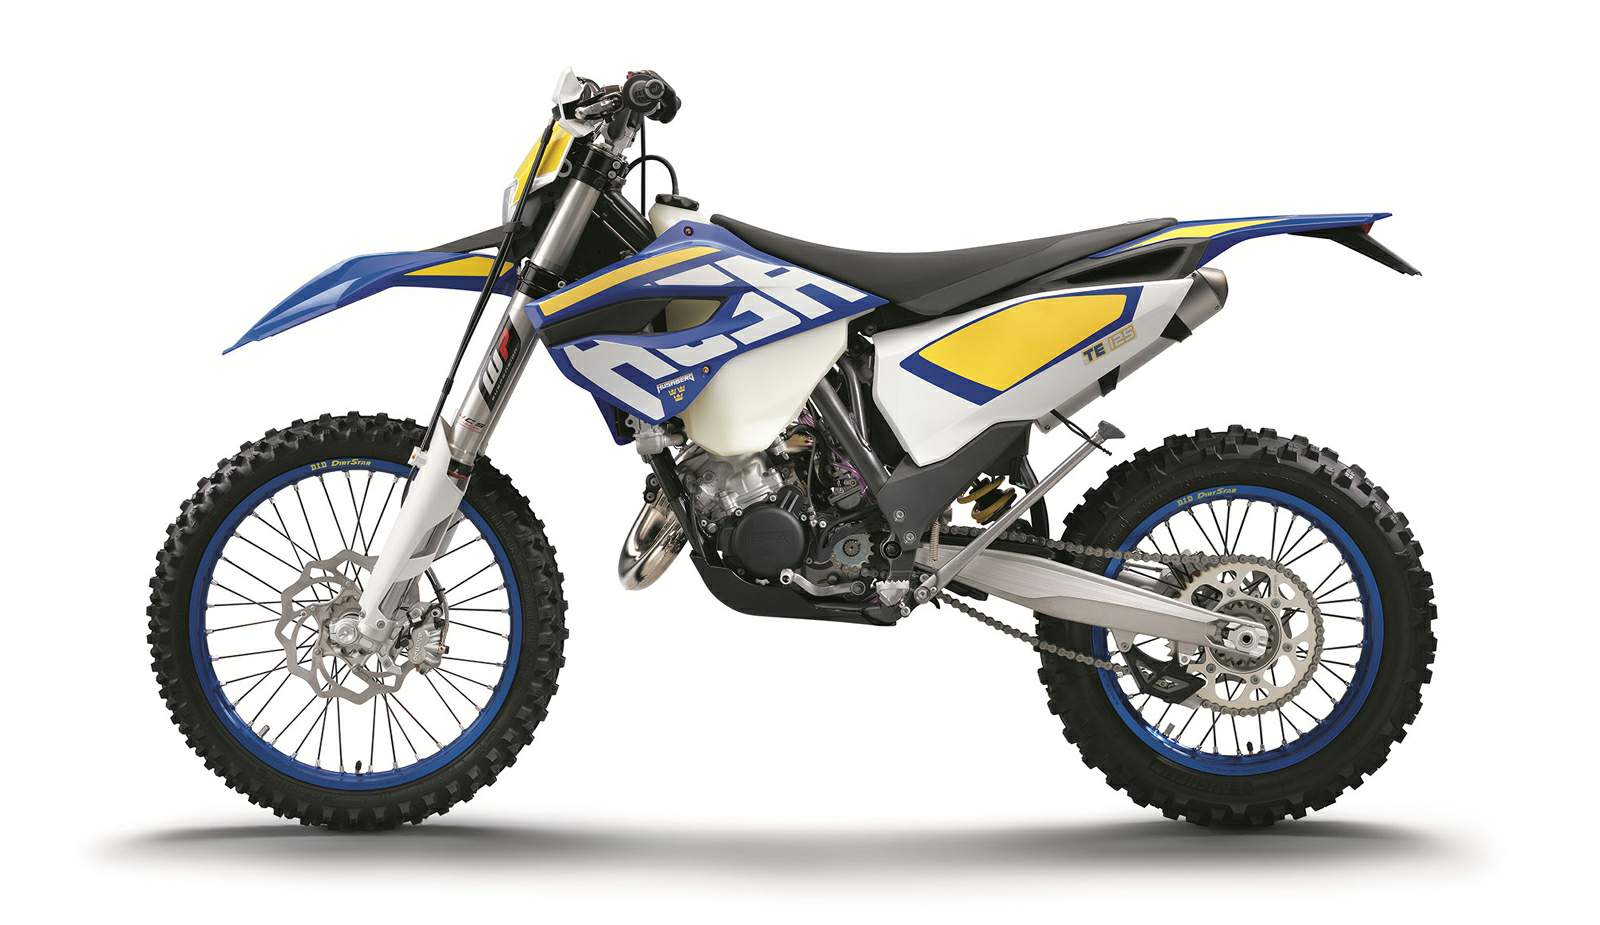 Husaberg TE 125 technical specifications